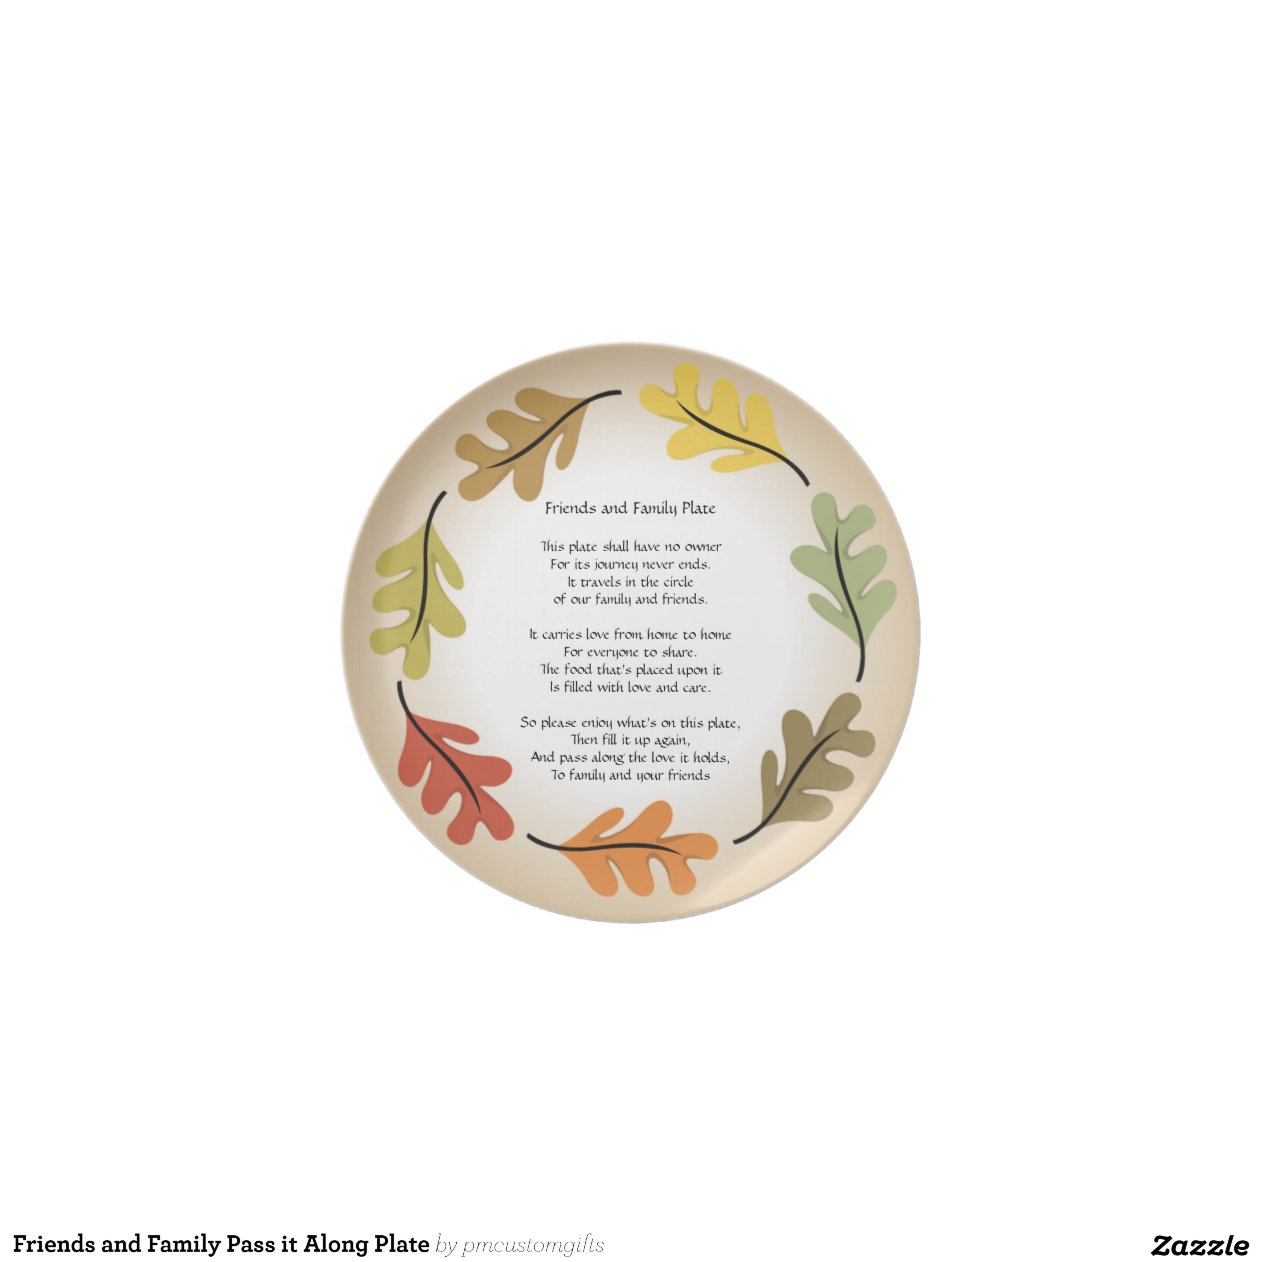 Friends and Family Pass it Along Plate | Zazzle